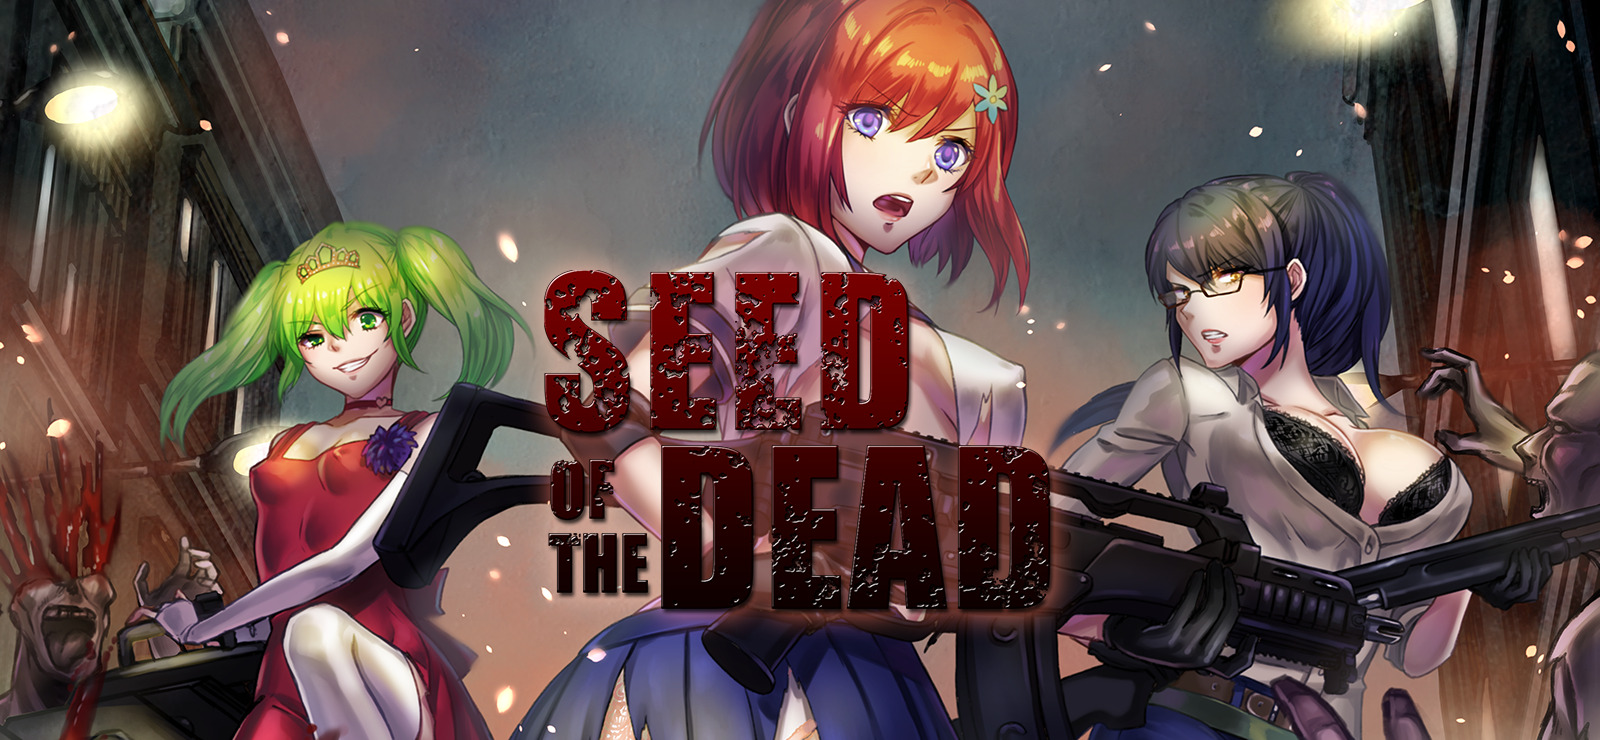 Seed_of_the_dead